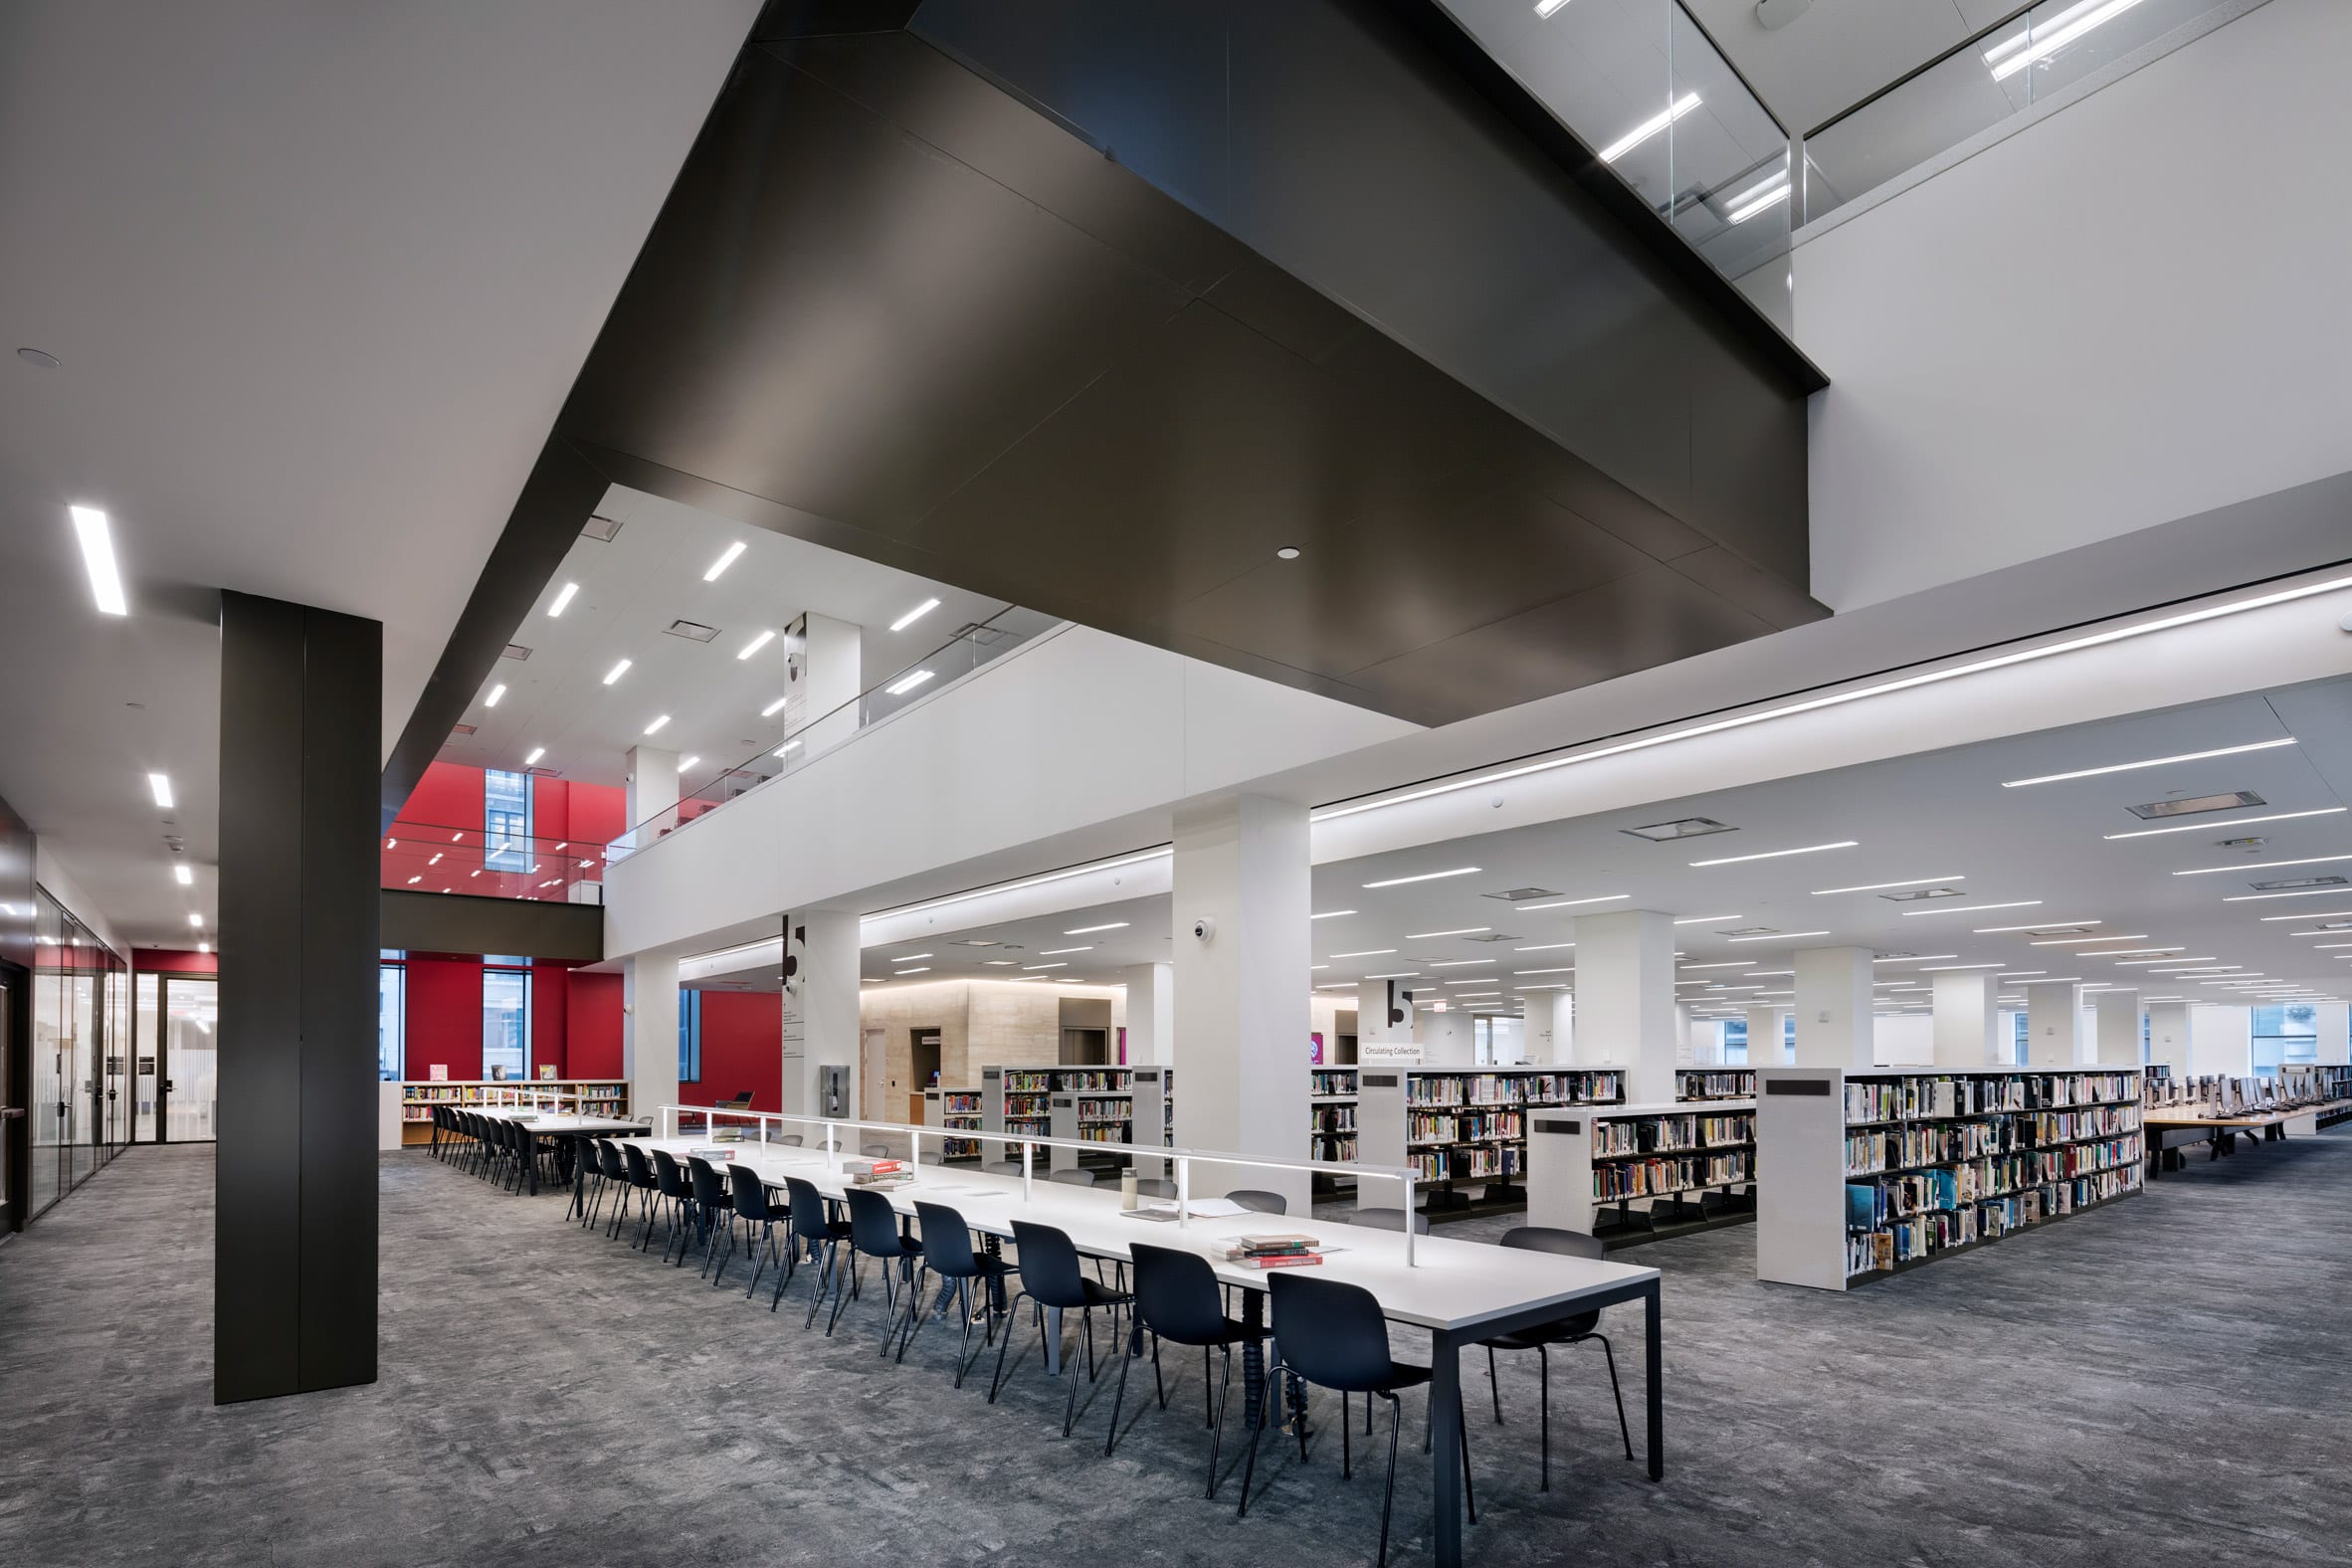 Interior of the Stavros Niarchos Foundation Library in New York